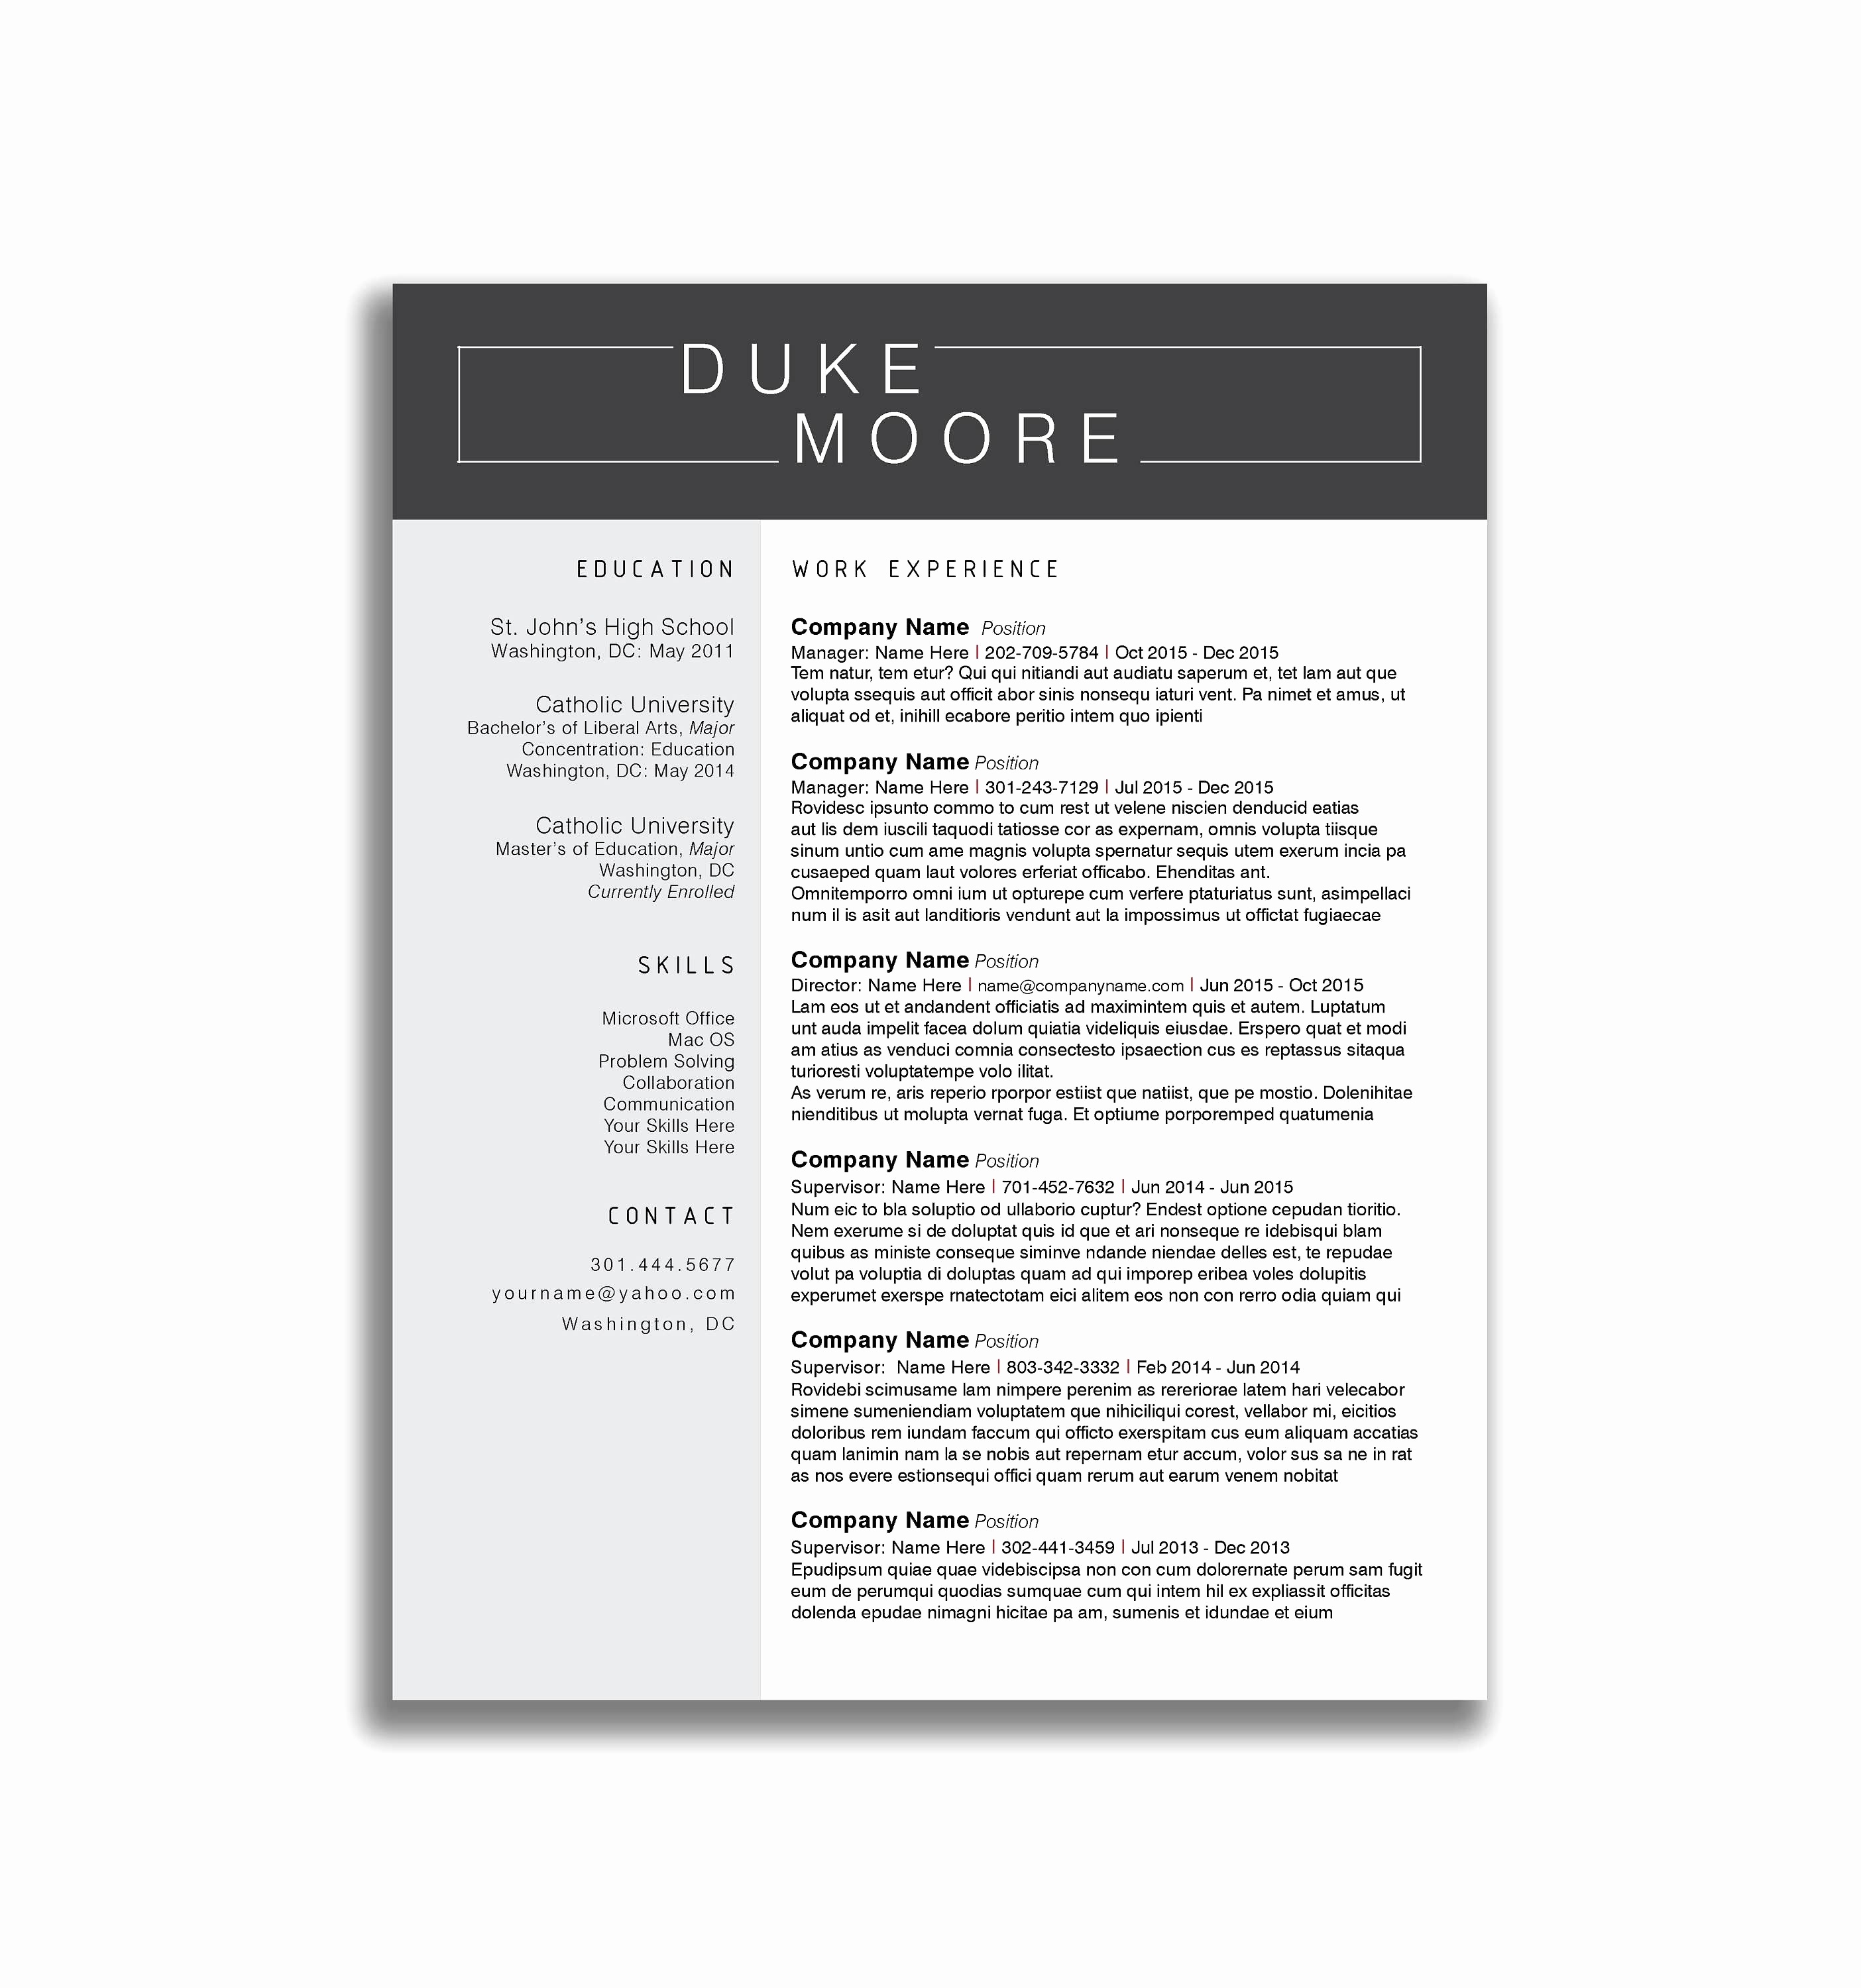 Resume Examples For Human Resources Position Luxury - Cover Letter , HD Wallpaper & Backgrounds